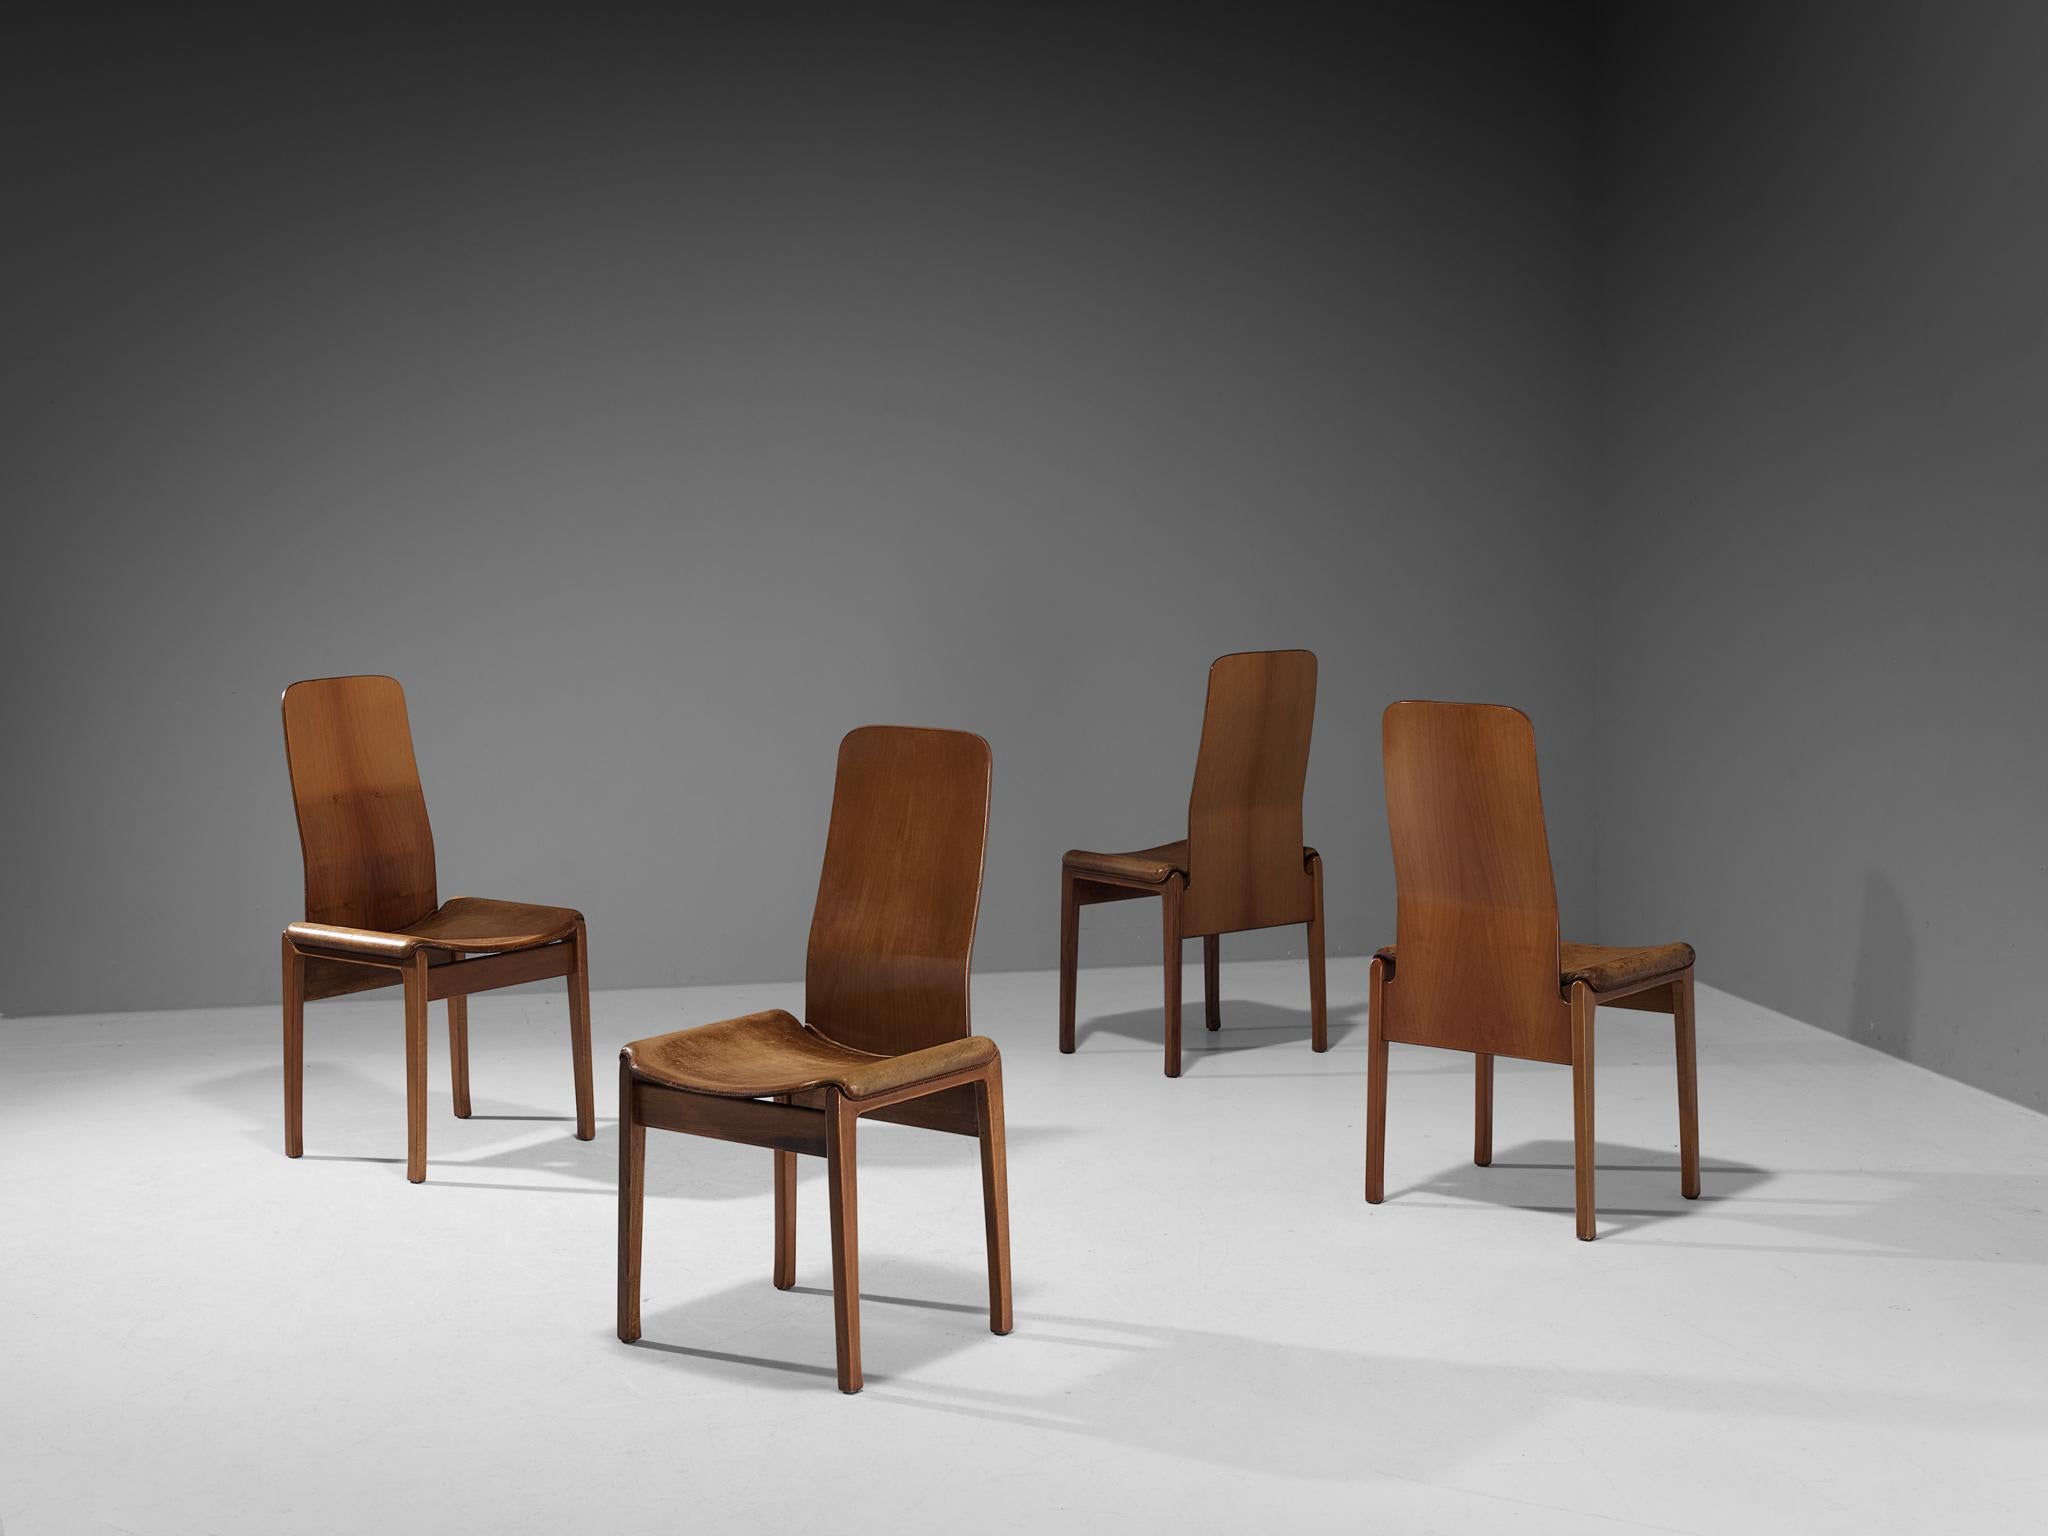 Tito Agnoli for Molteni, set of four 'Fiorenza' dining chairs, walnut, leather, Italy, 1968

These chairs are an excellent example of Italian Mid-Century design. The back is slightly curved in the middle, which is not only aesthetically pleasing,